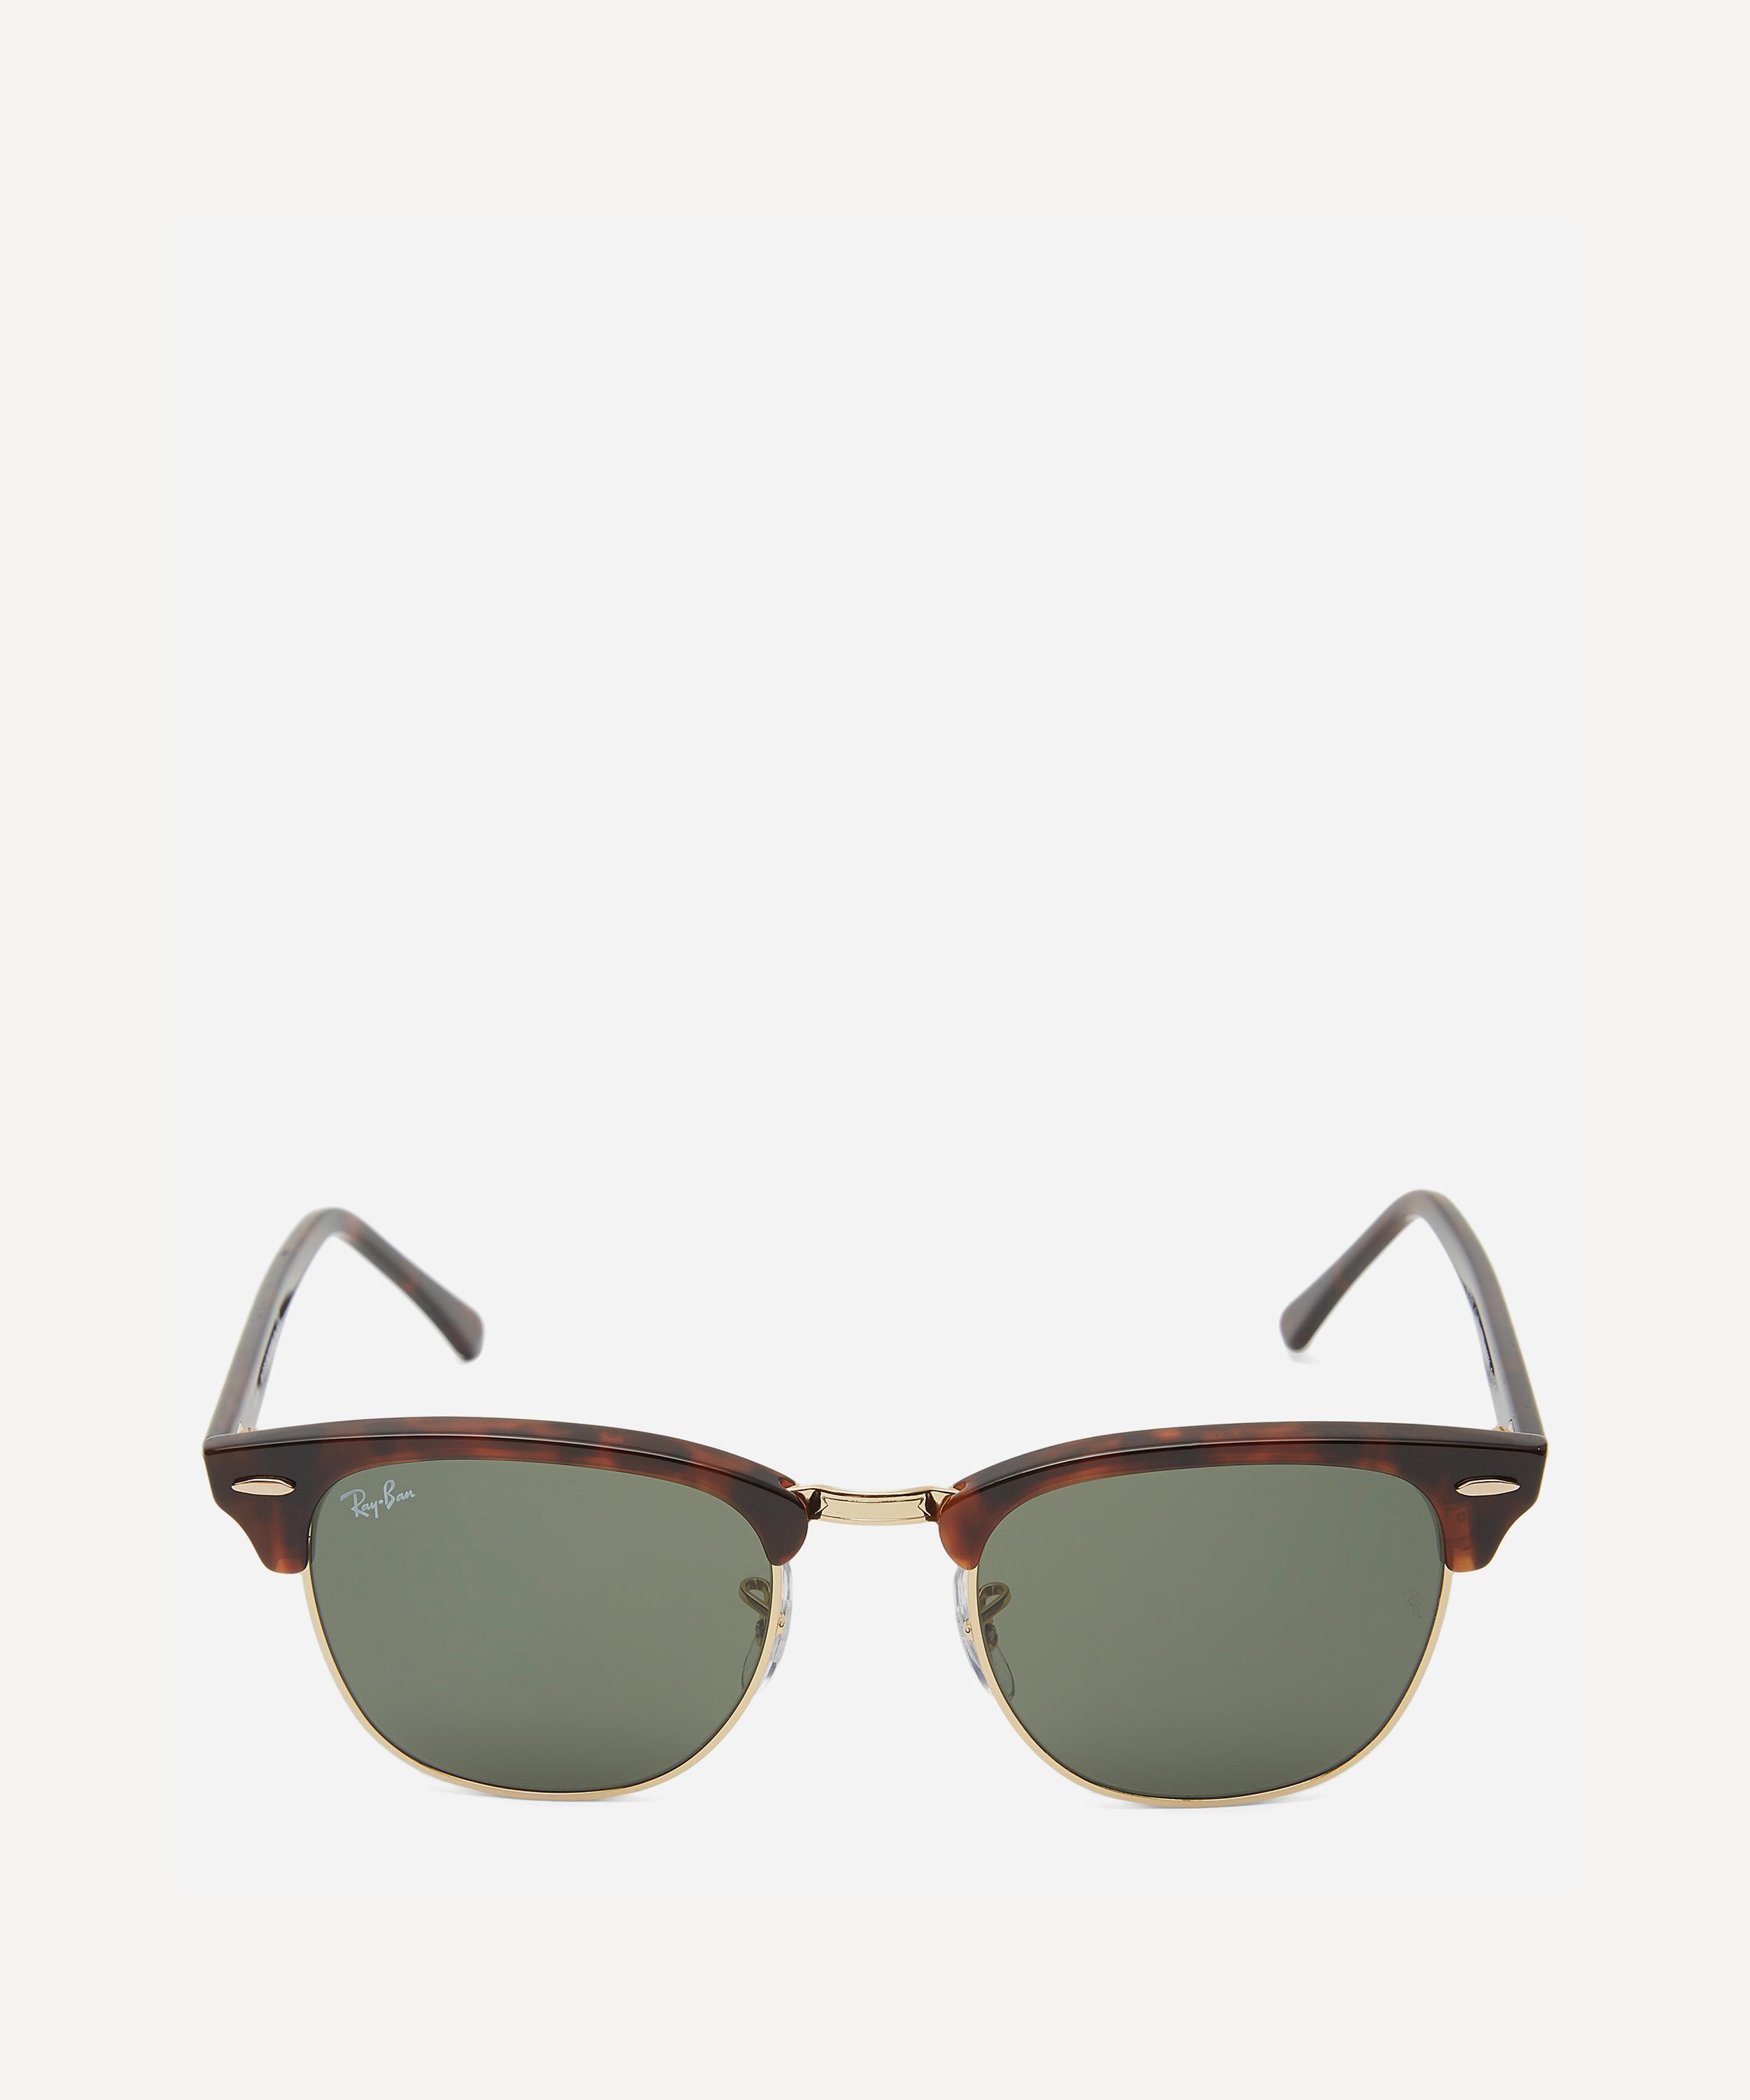 Ray-Ban - Clubmaster Sunglasses image number null